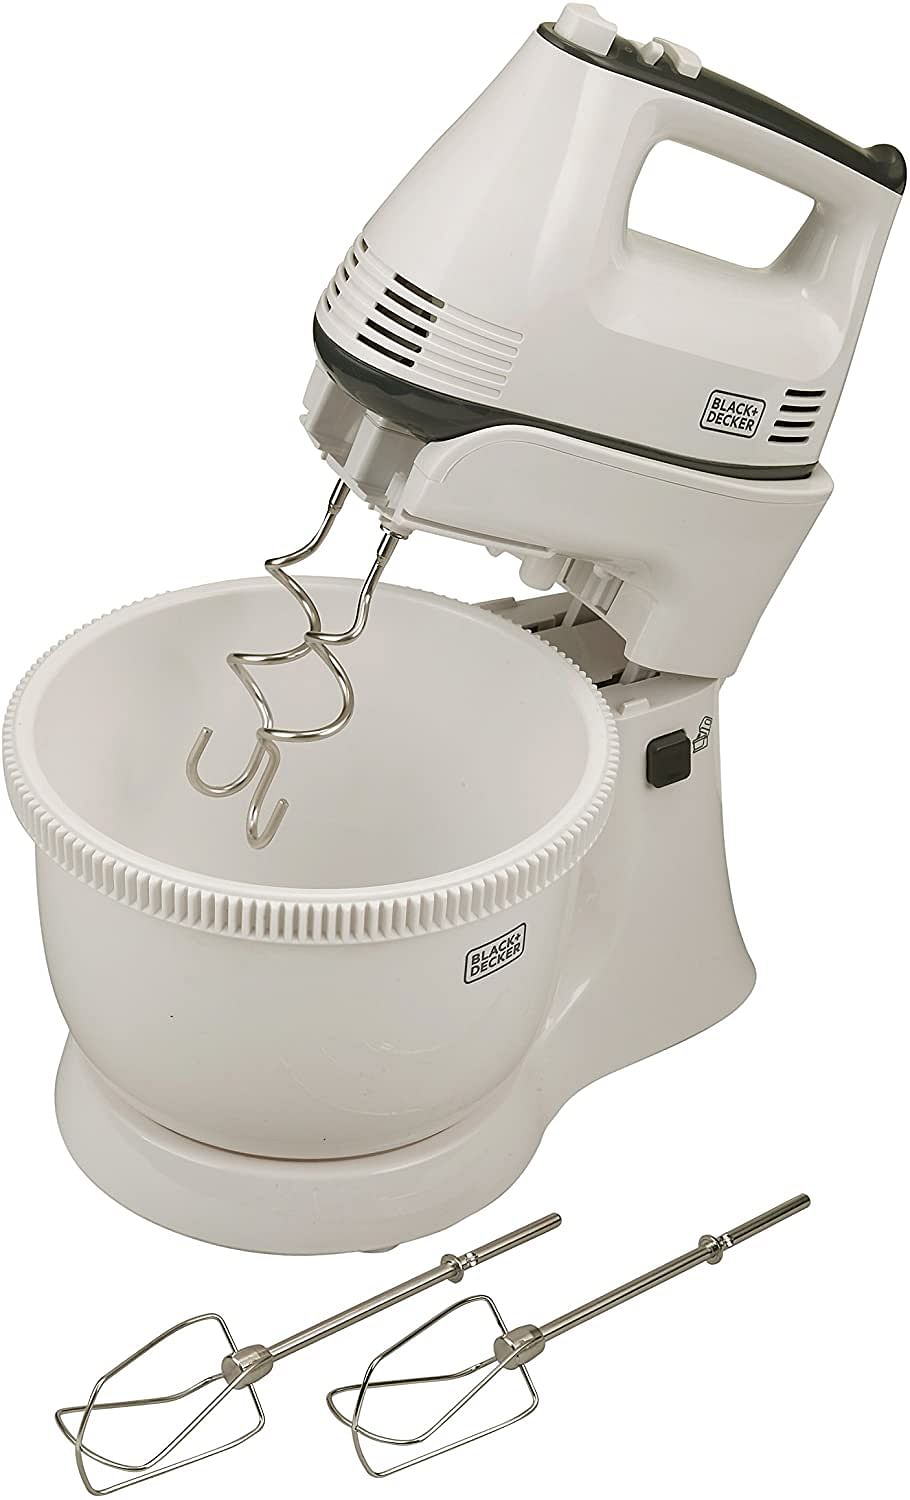 Black+Decker 300w 5 Speed Multifunction  Bowl And Stand Mixer, White - M700